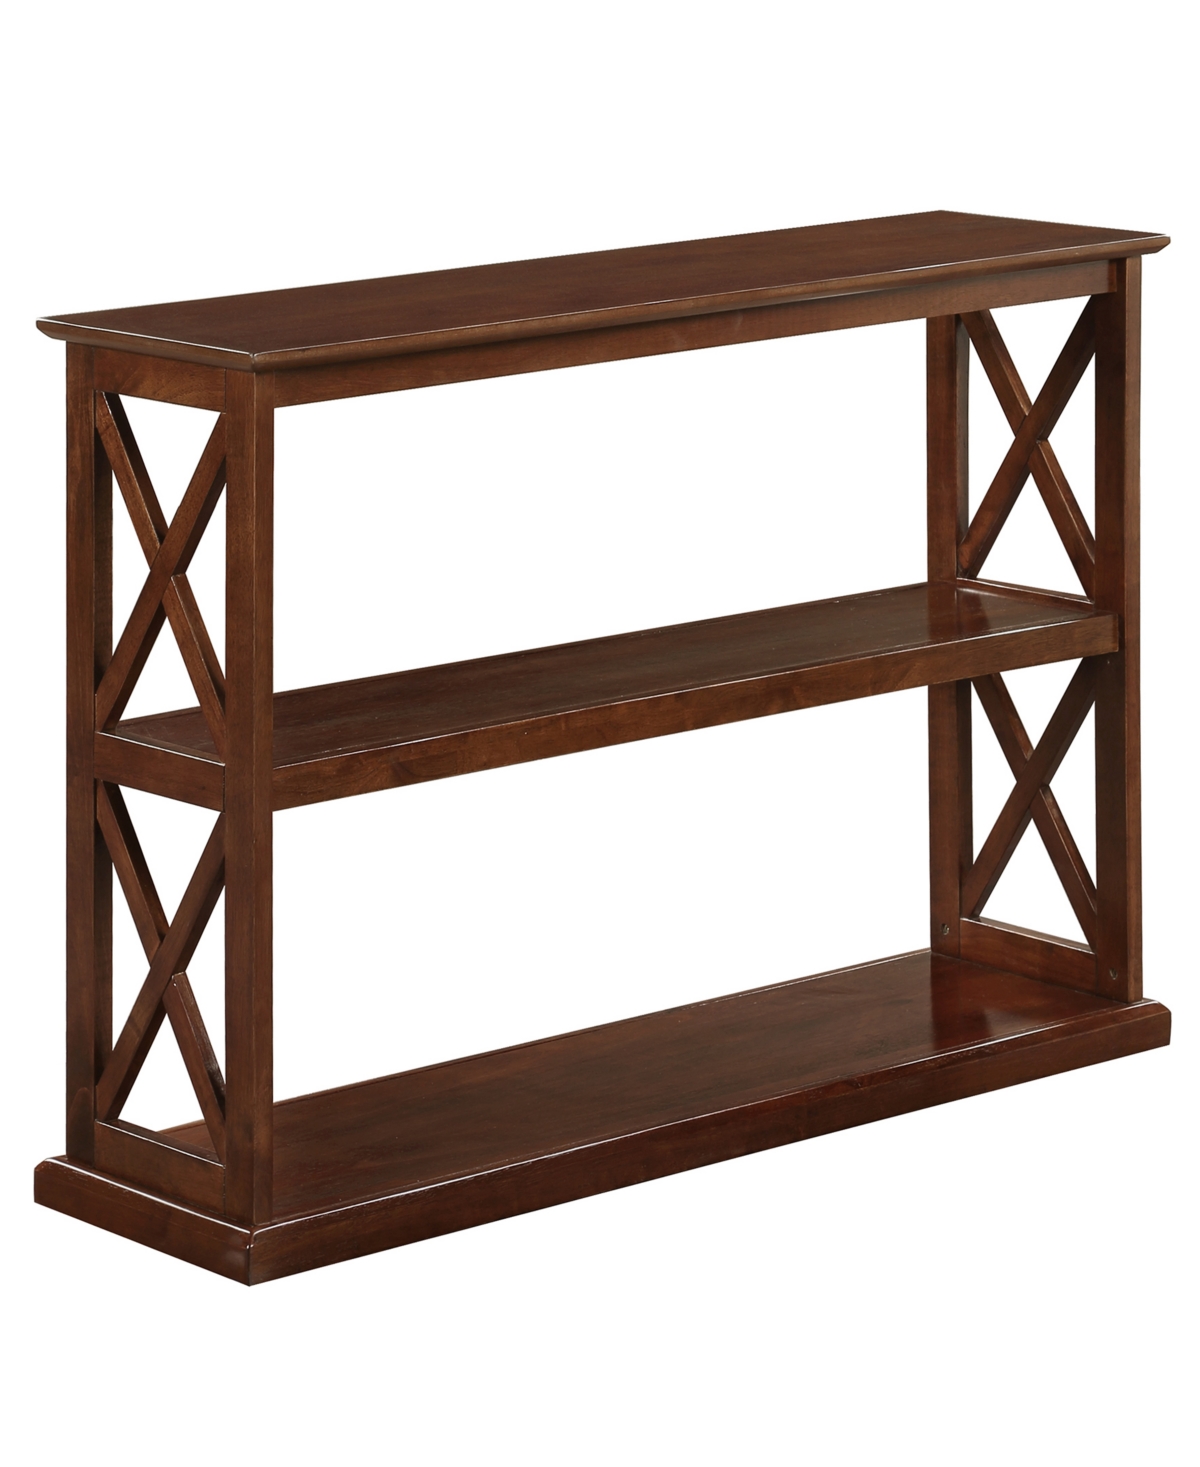 Convenience Concepts 42" Mdf Coventry Console Table With Shelves In Espresso